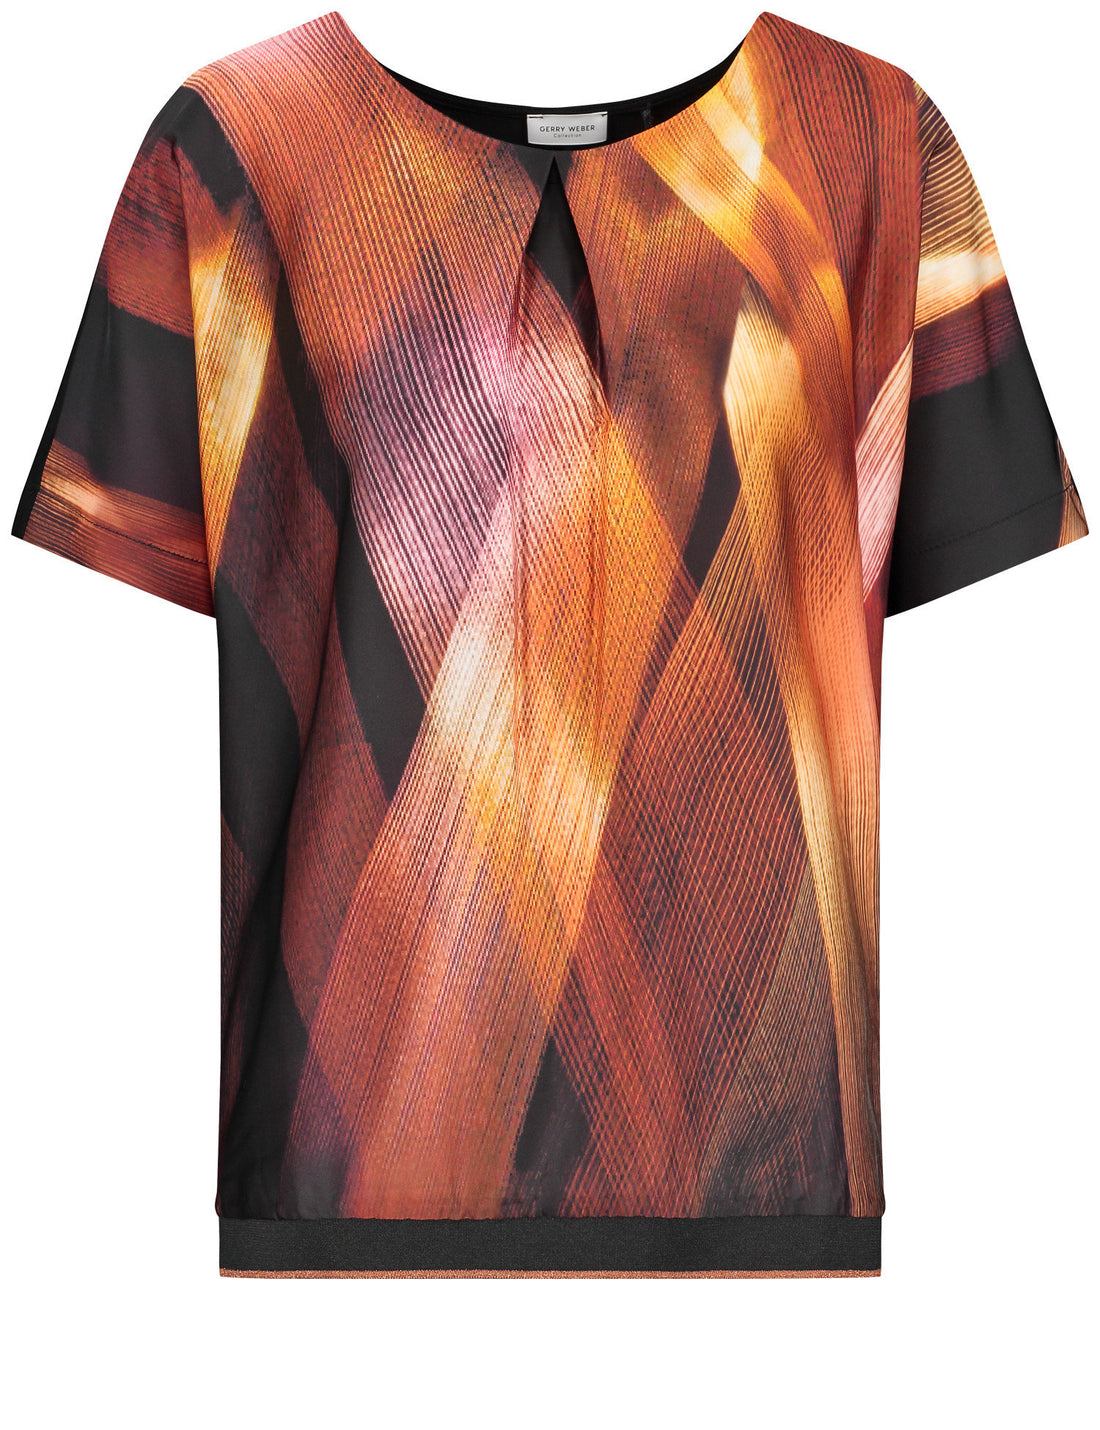 Multi Color T Shirt With Cool Design_270213-35013_9101_01